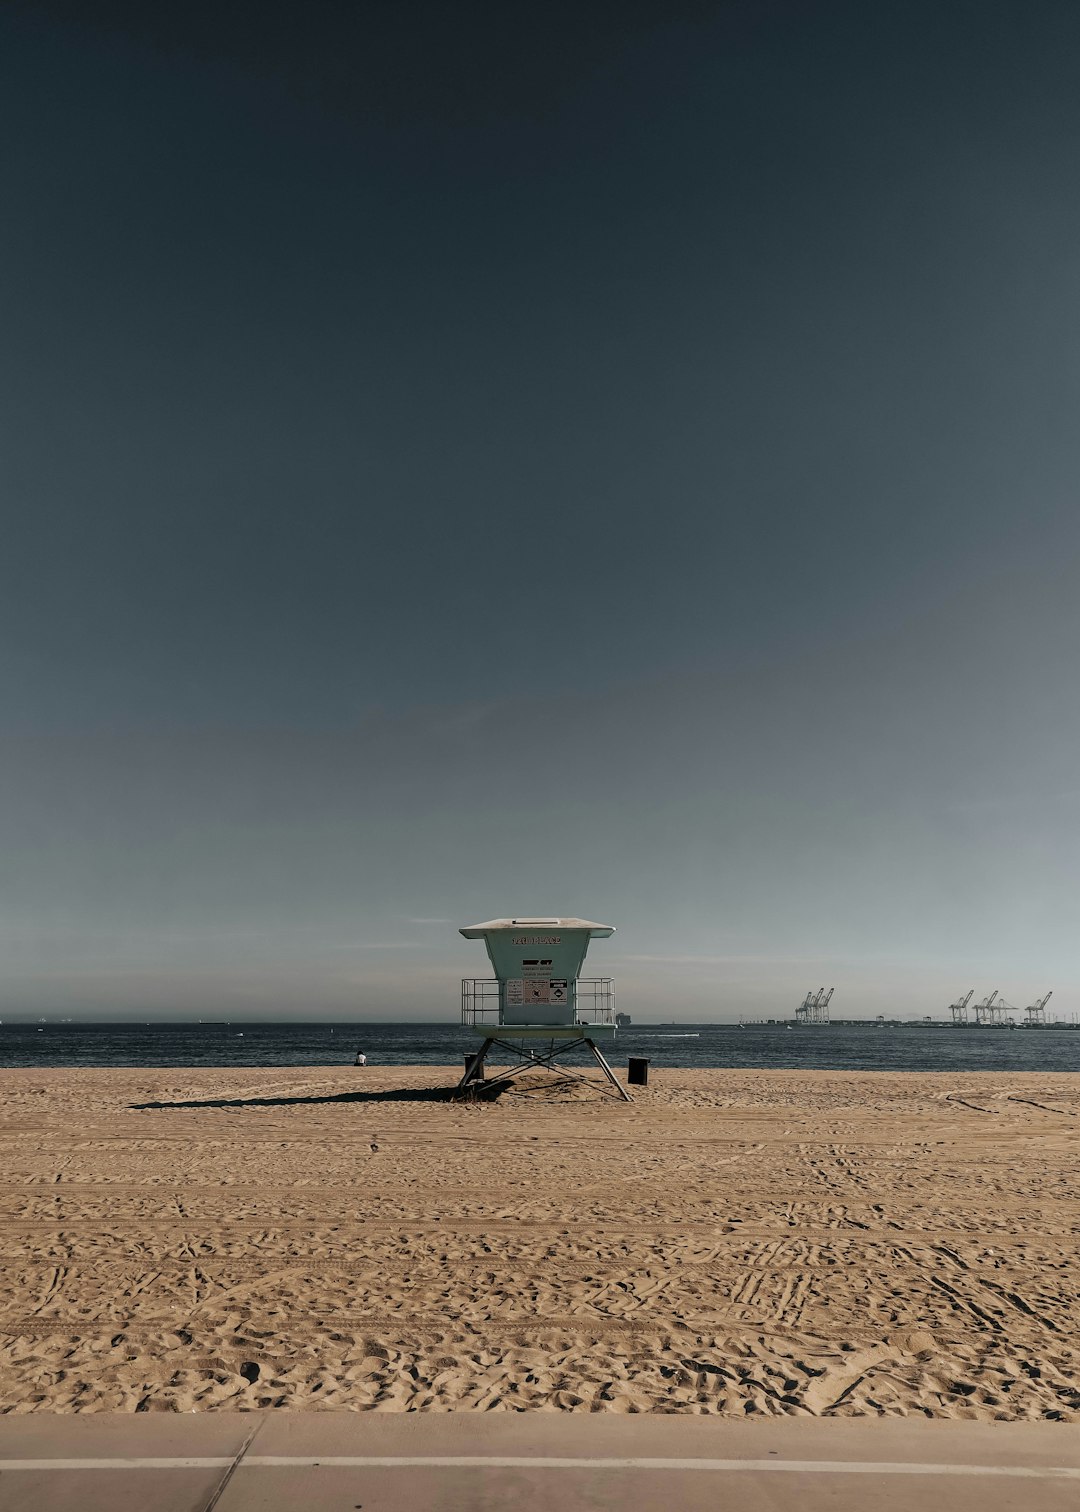 blue and white lifeguard tower on brown sand near sea during daytime